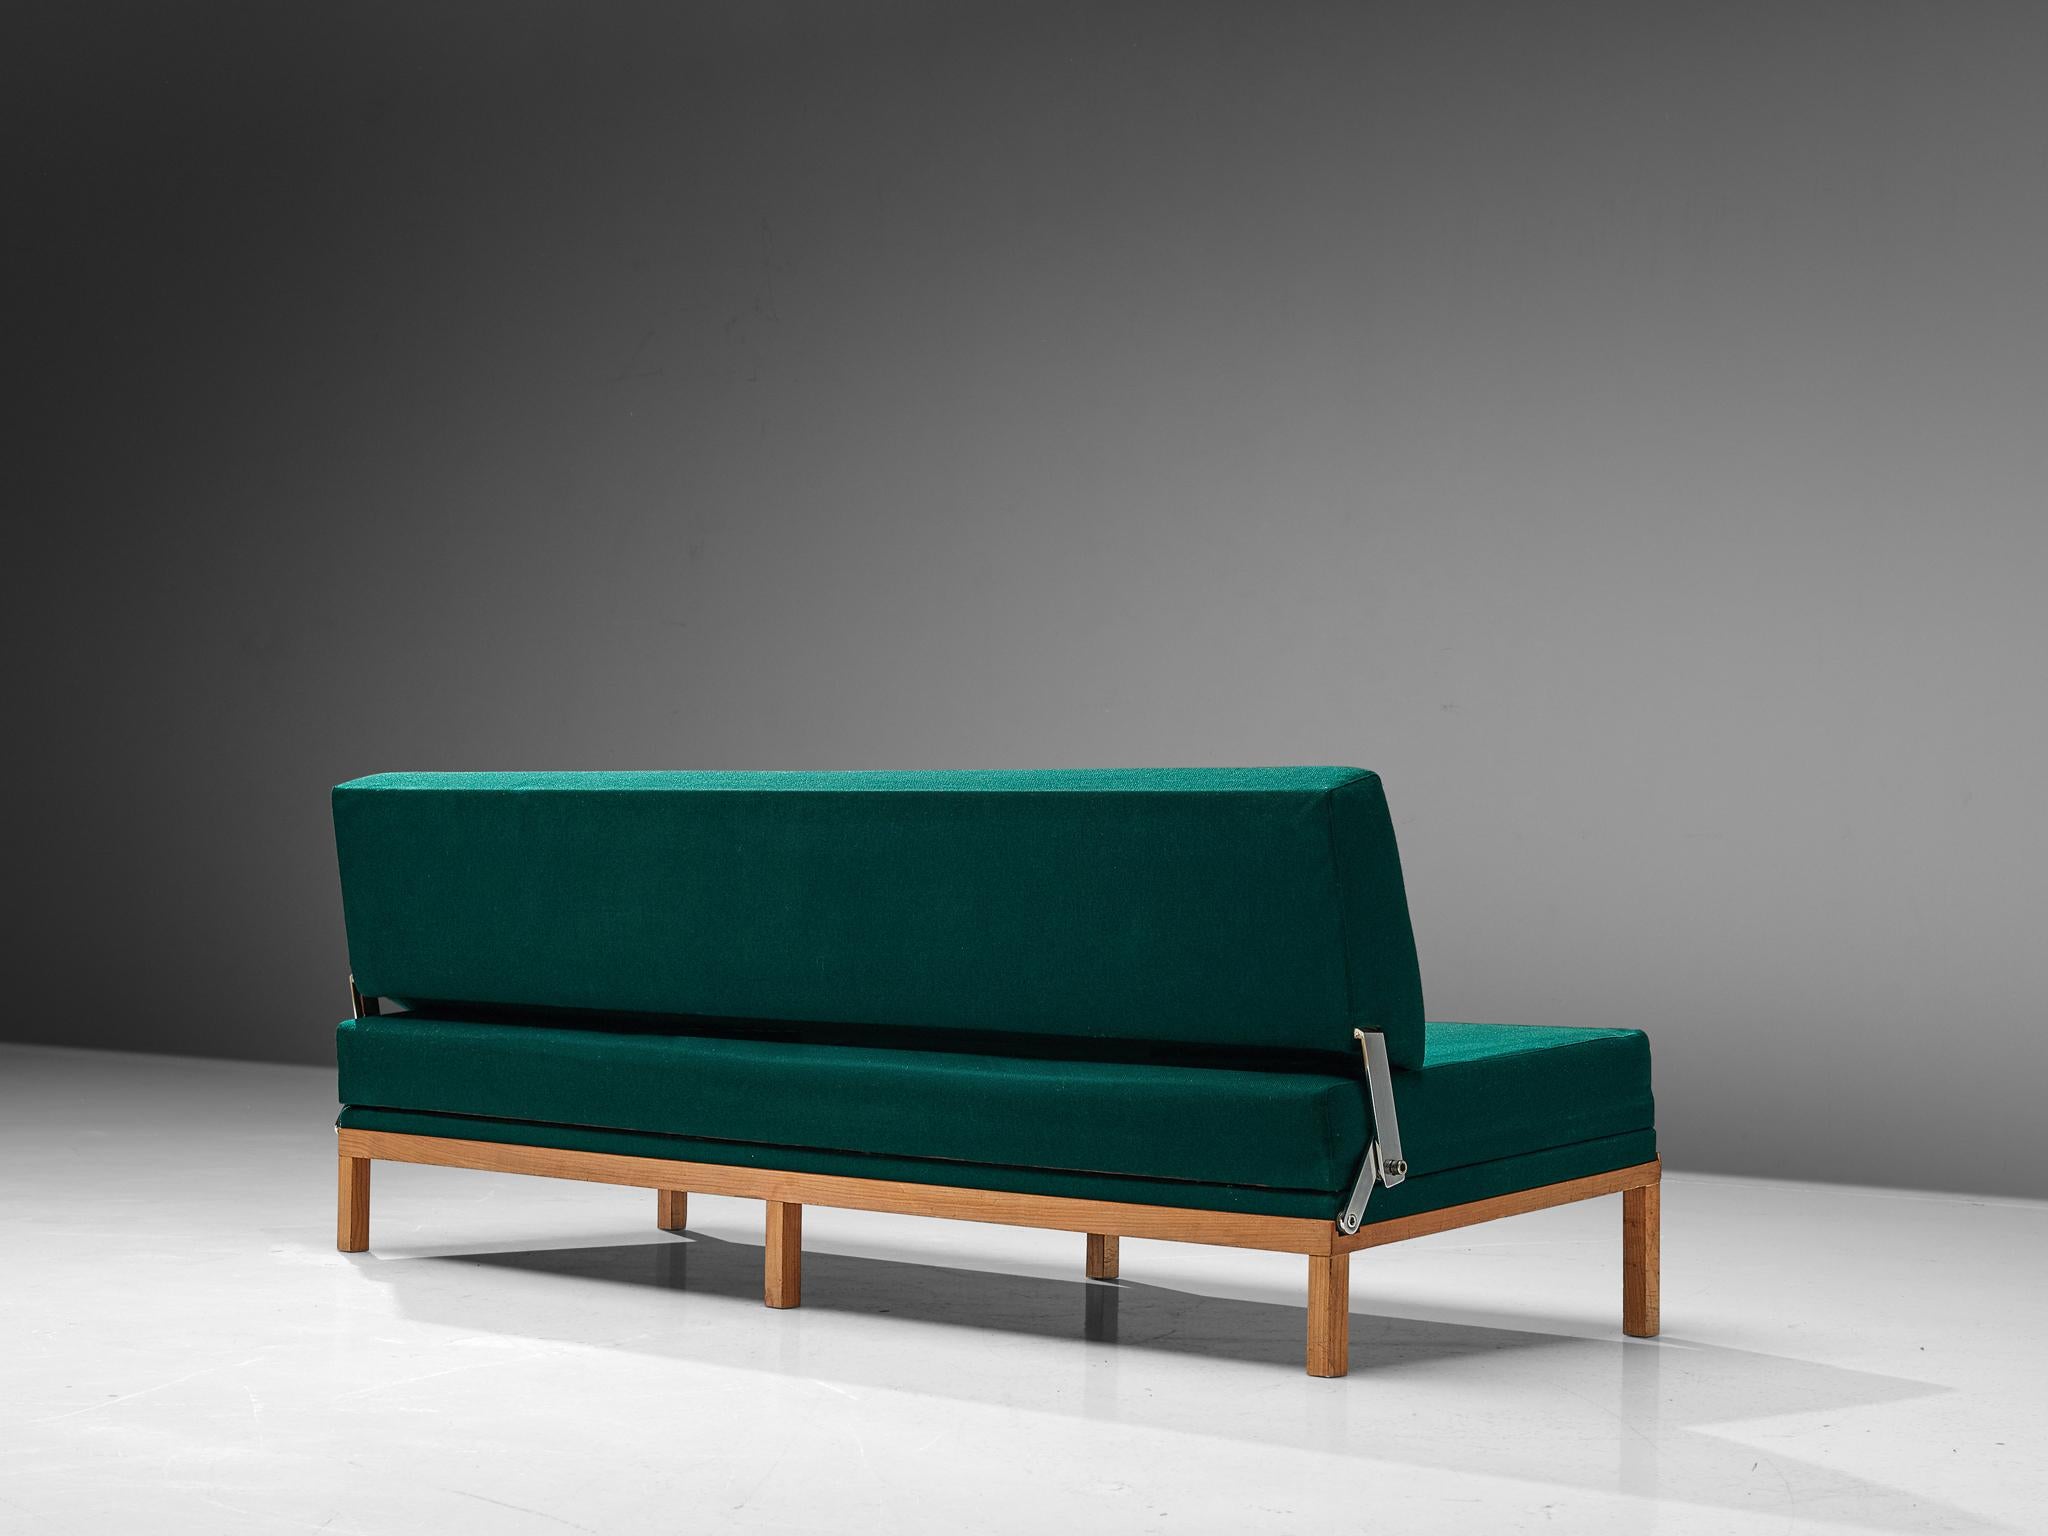 Johannes Spalt 'Constanze' Daybed in Green Upholstery  For Sale 2